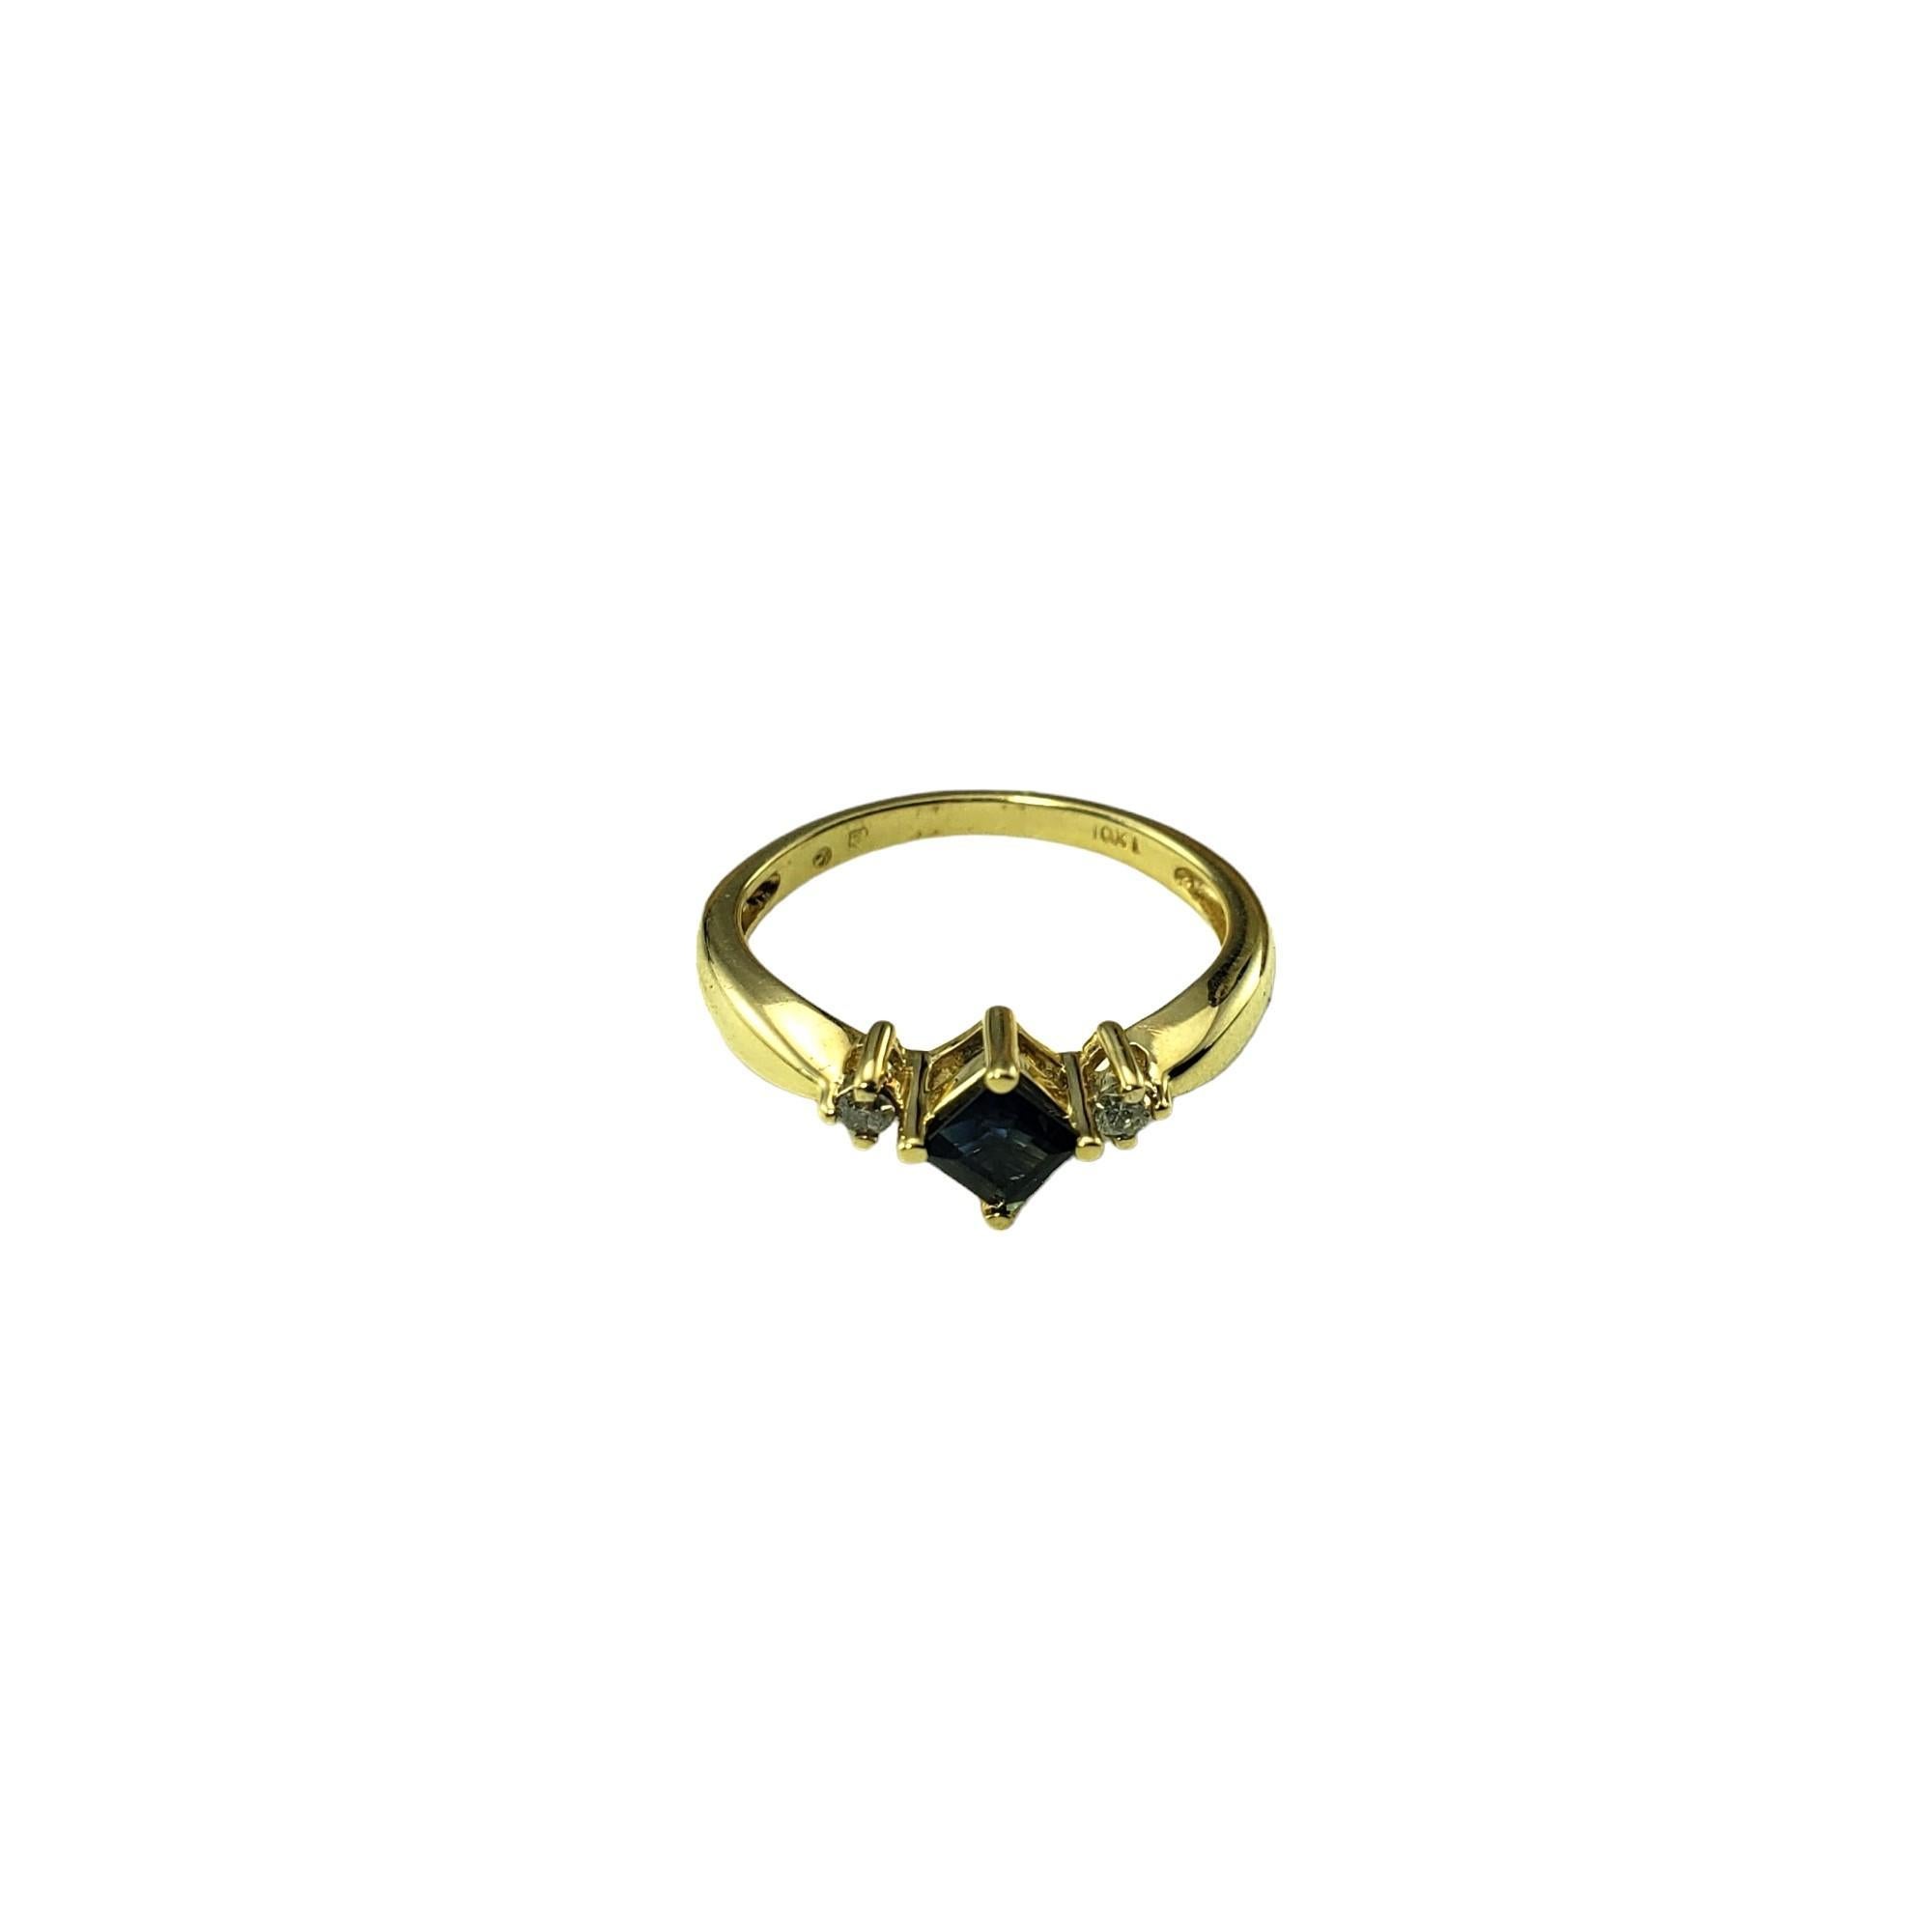 Vintage 10 Karat Yellow Gold Sapphire and Diamond Ring Size 4.25-

This elegant ring features one square sapphire (4 mm x 4 mm) and two round brilliant cut diamonds set in classic 10K yellow gold.  Shank: 1.5 mm.

Total diamond weight: .02